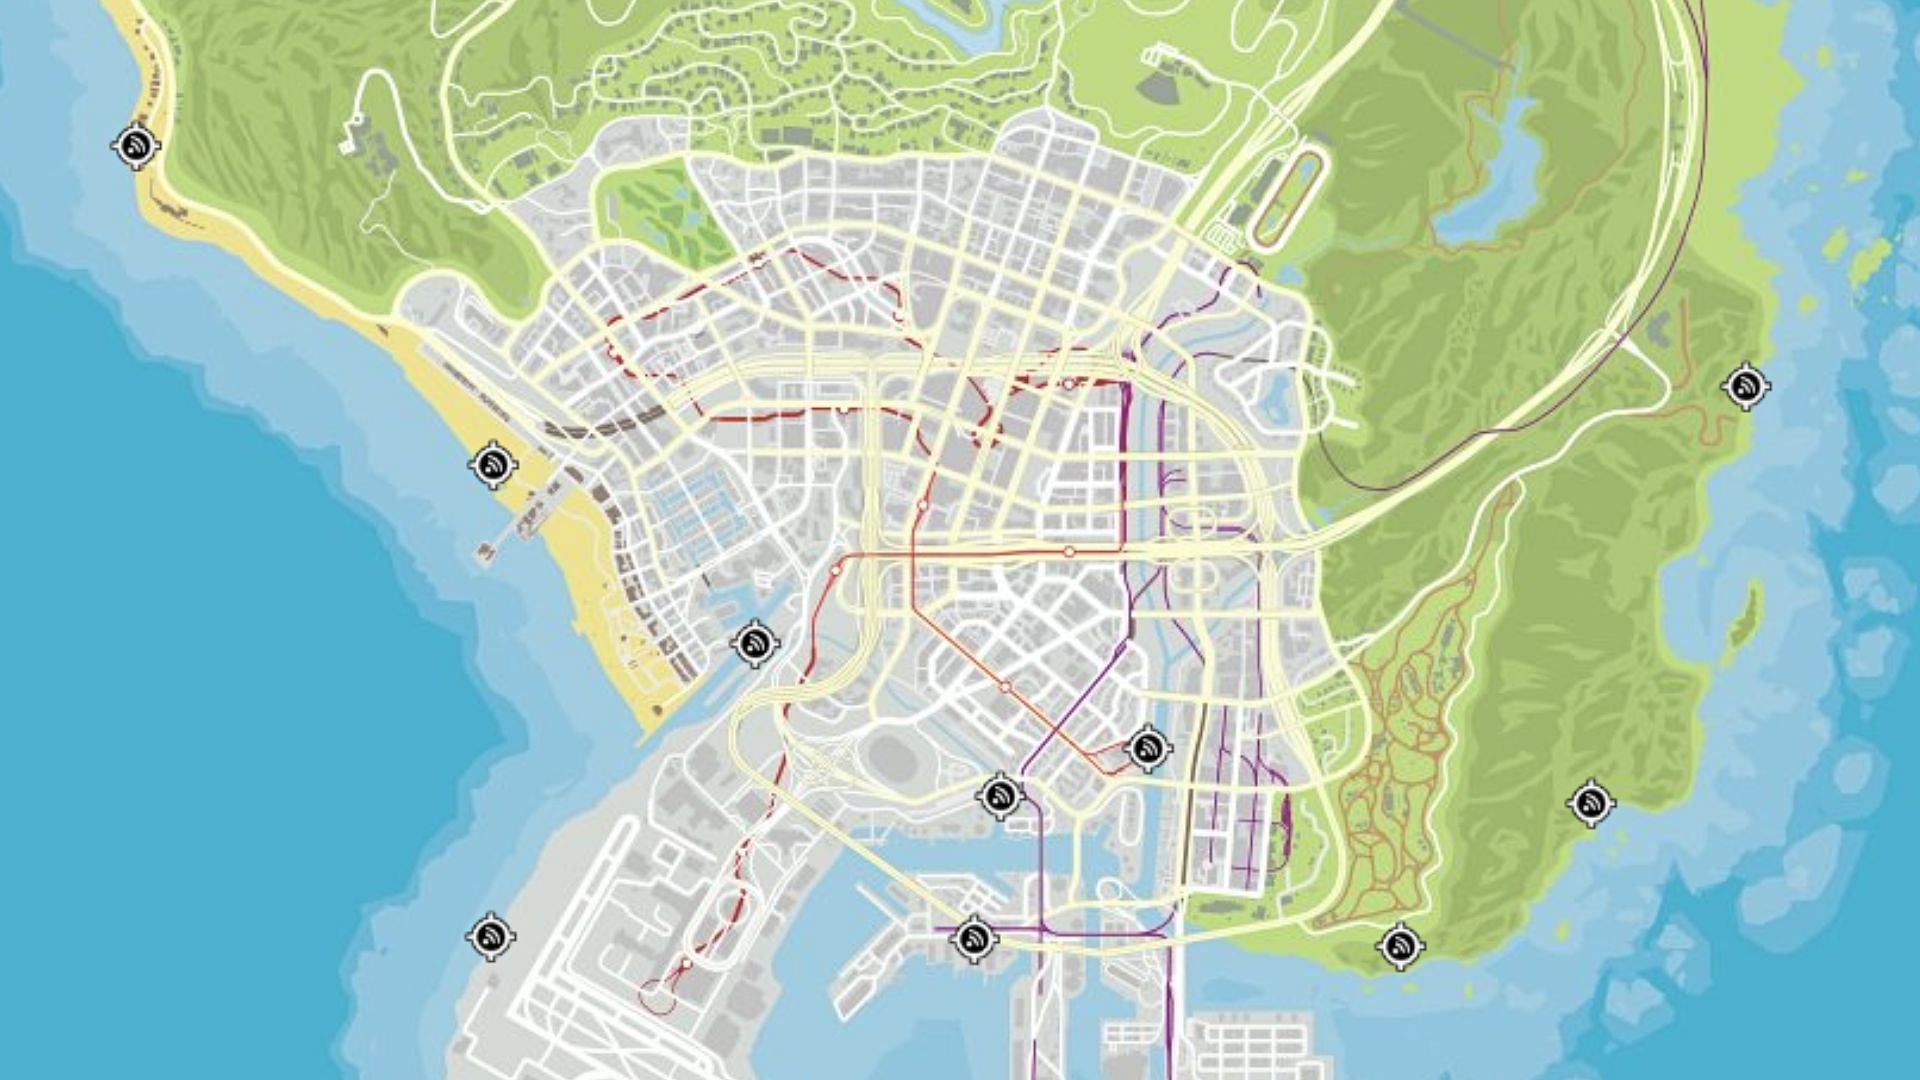 The skeleton will spawn at one of these locations in a GTA Online session. (Image via gtaweb.eu)